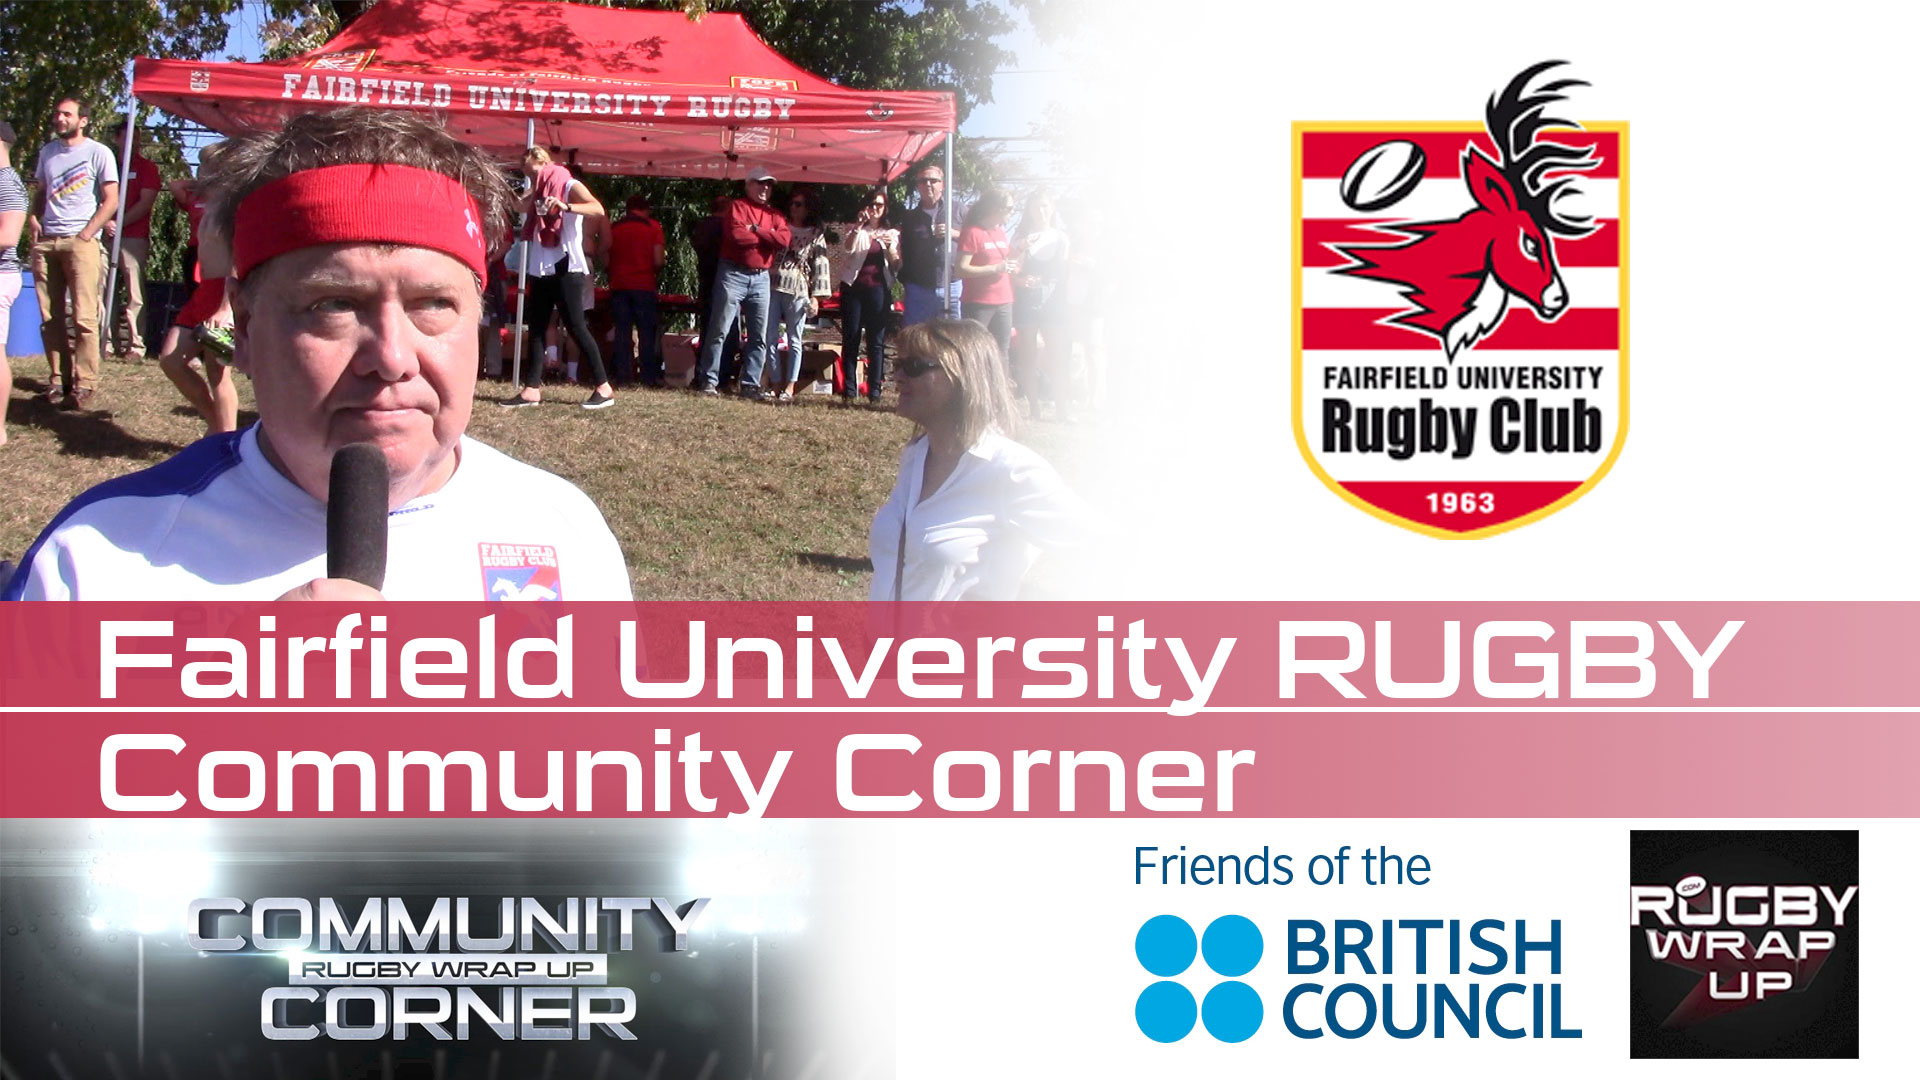 ugby_Wrap_Up FNSY 20 Fairfield-University-Rugby-Community-Corner